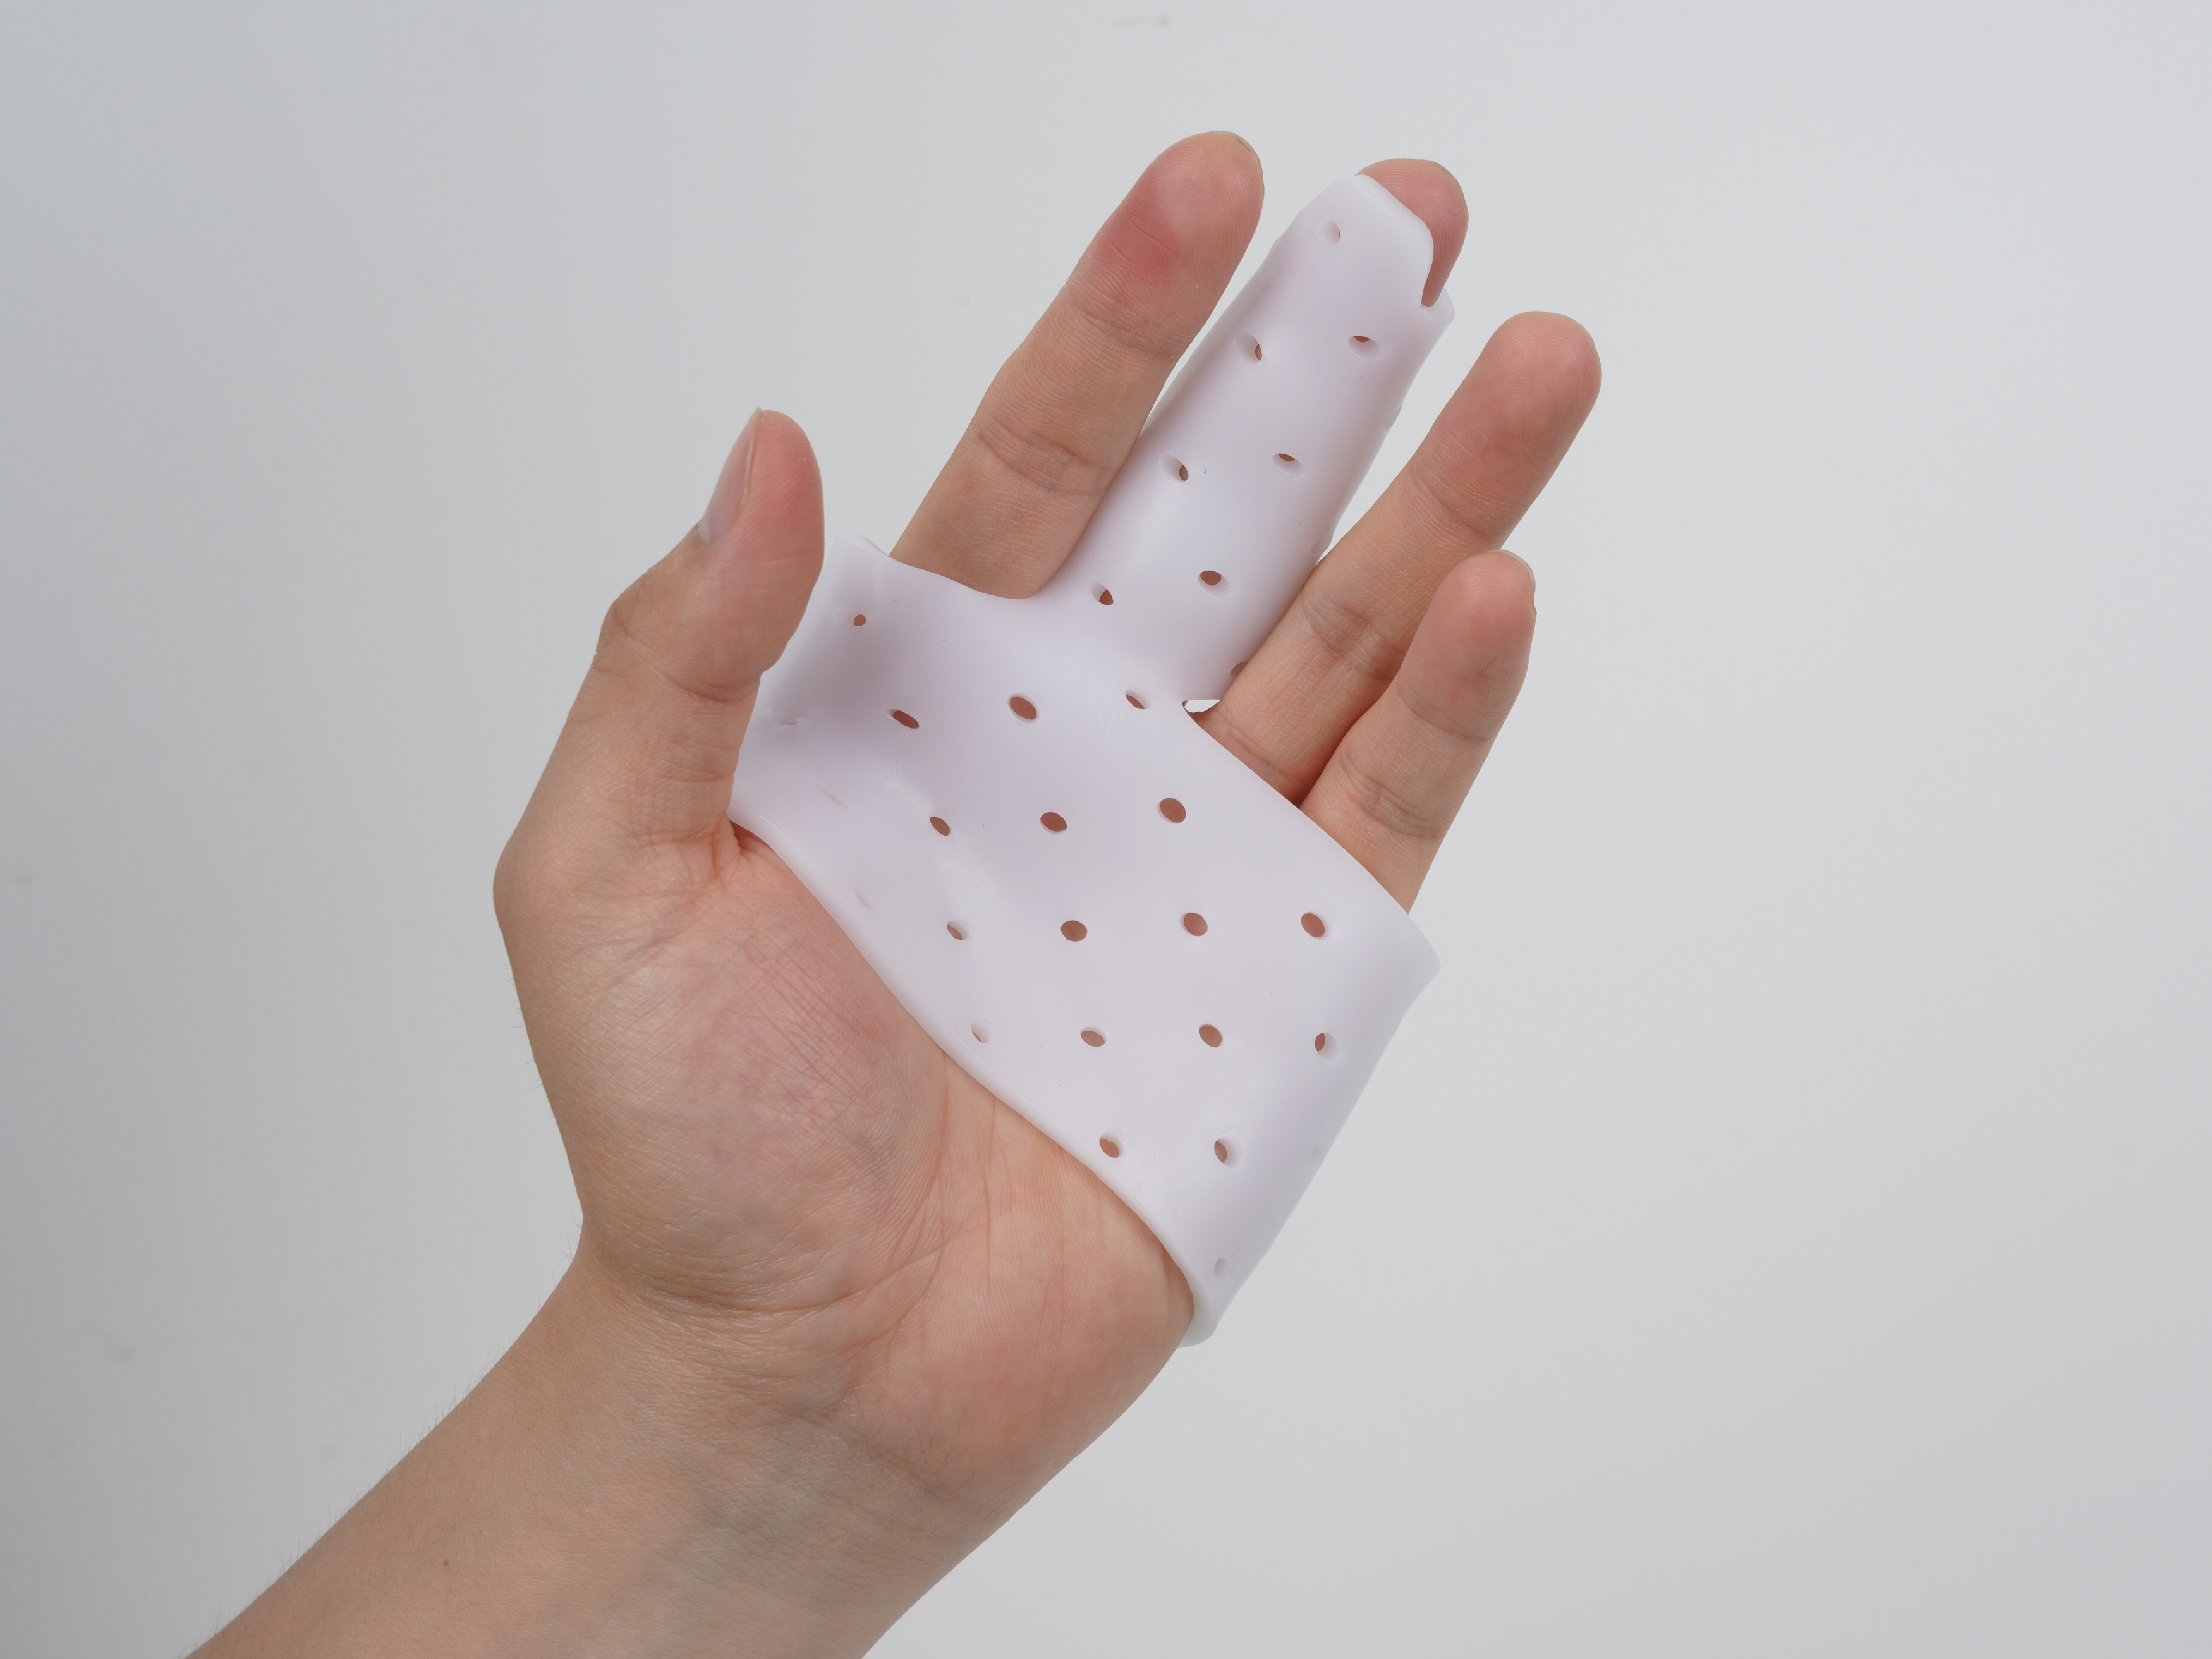 How to make a thermoplastic thumb splint？